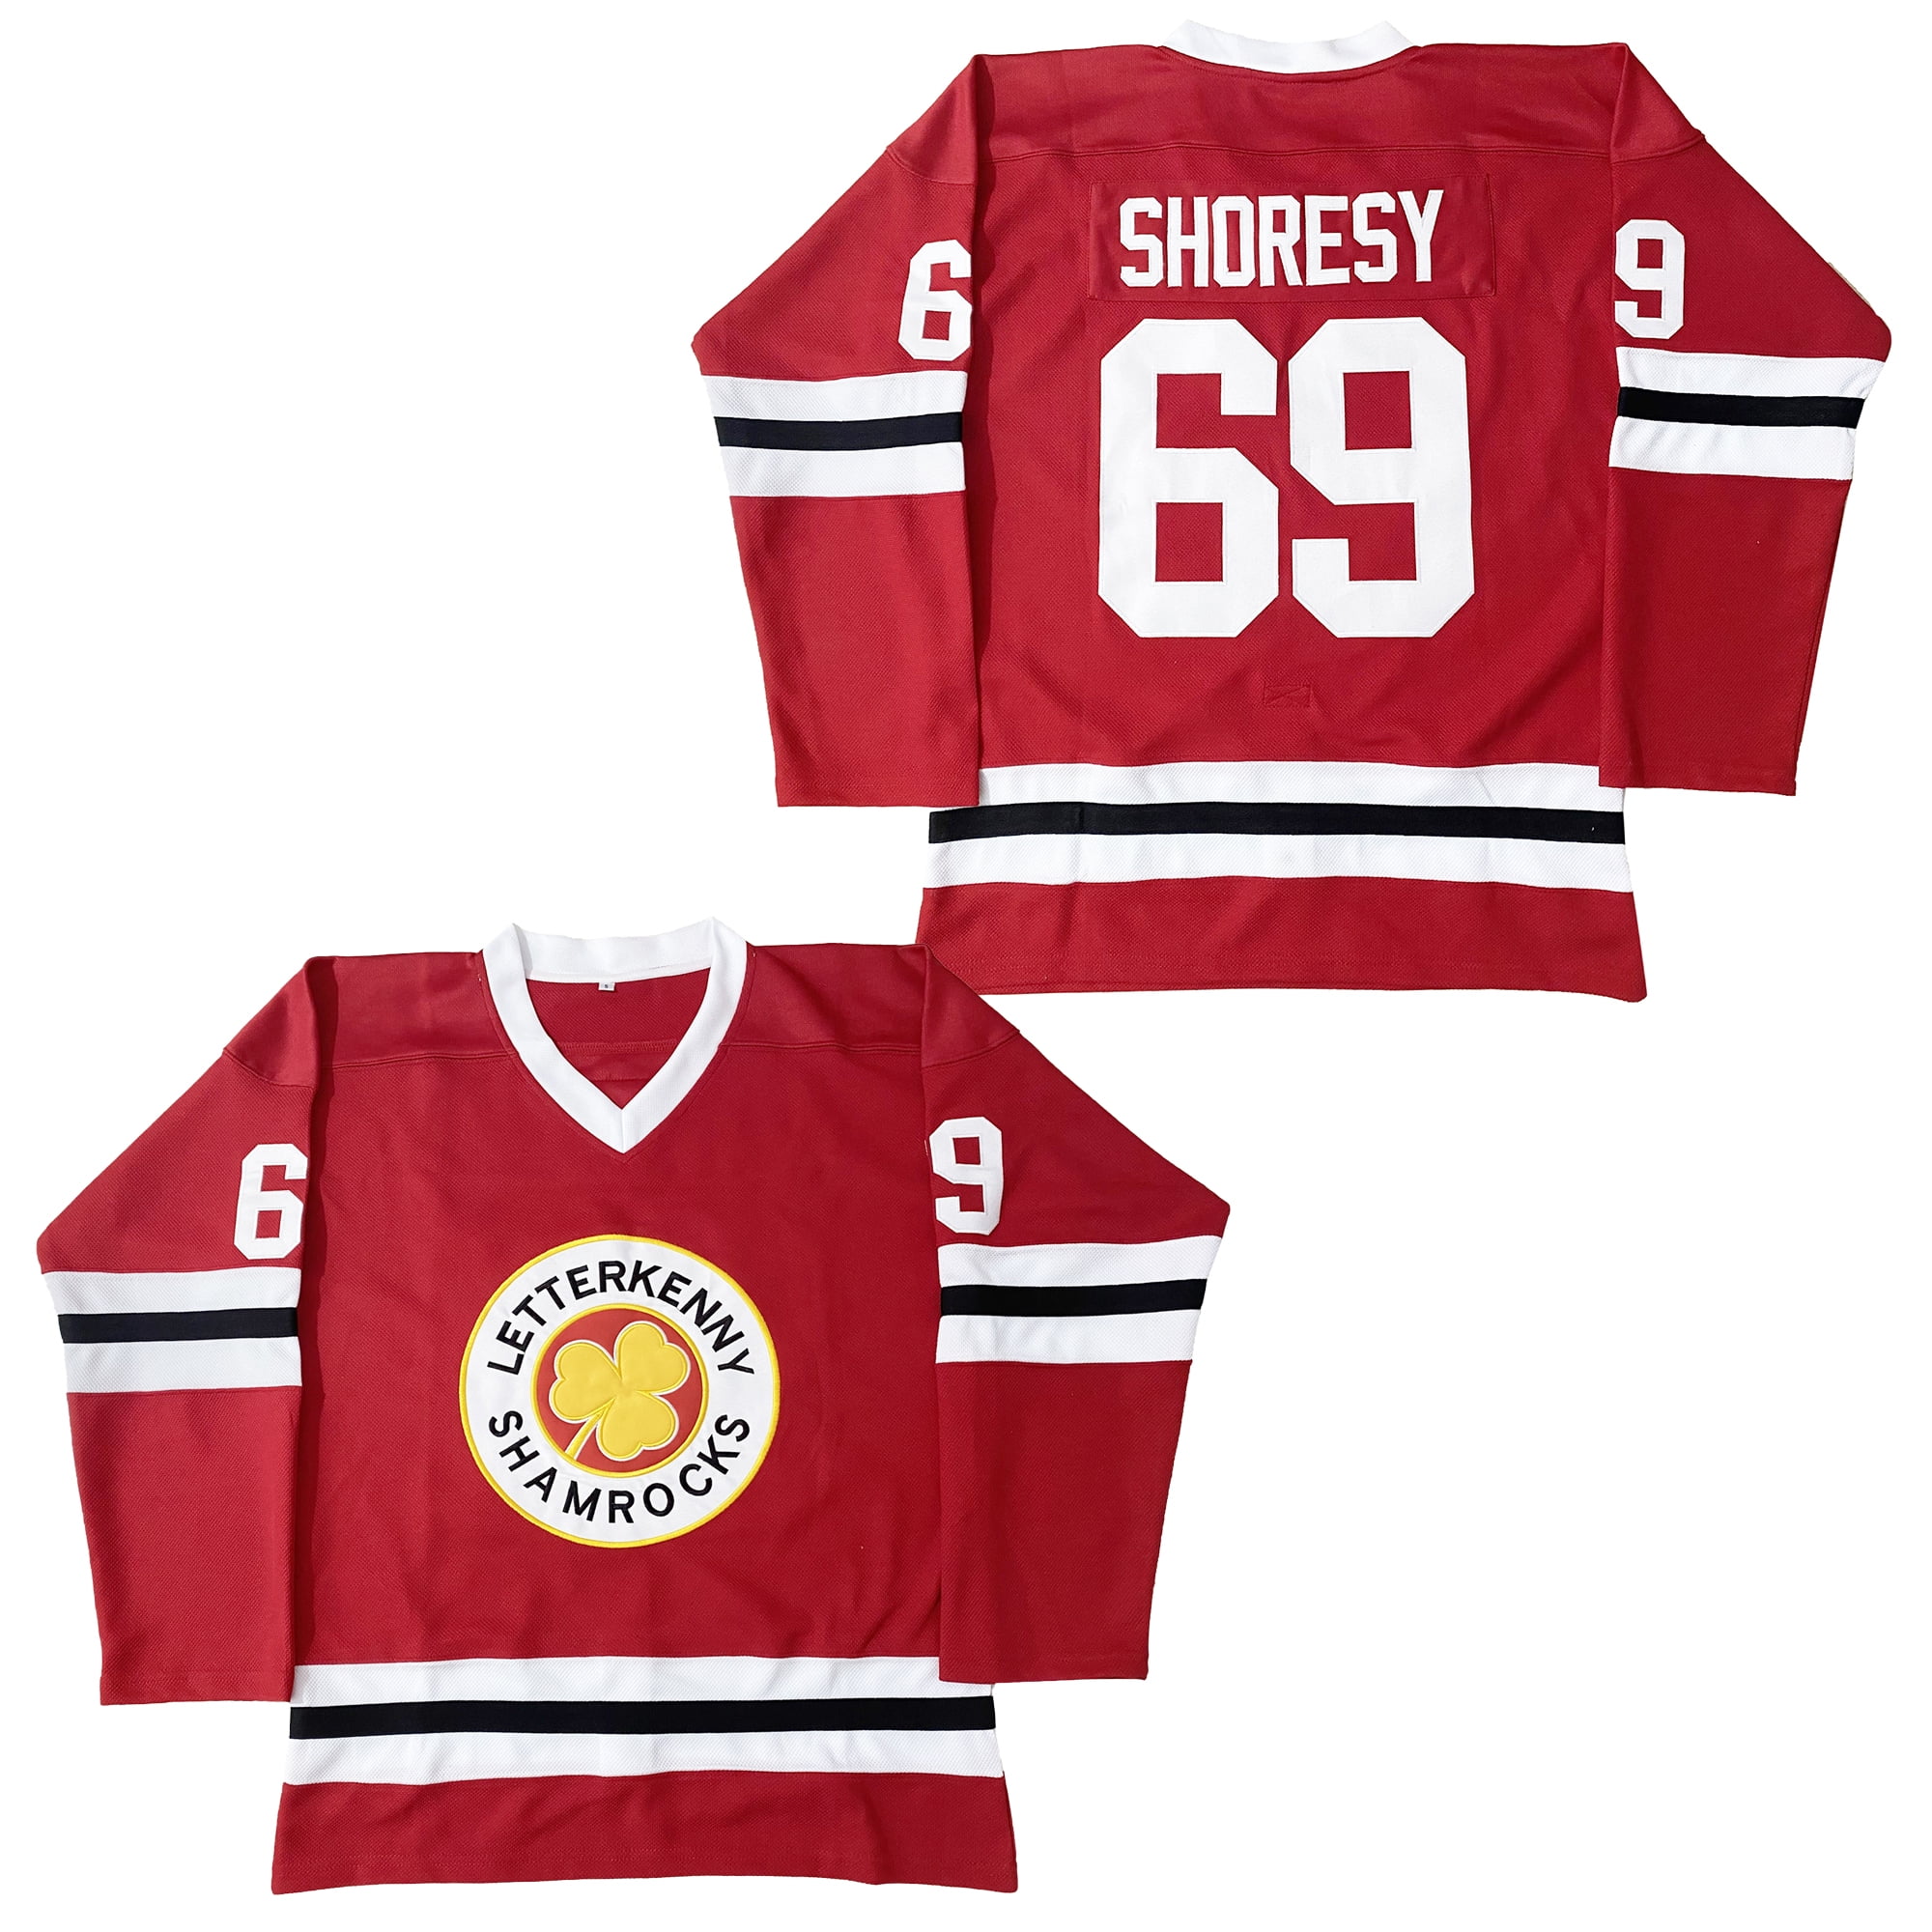  Men's #69 Shoresy Jersey Summer Christmas Letterkenny TV Series  Green Hockey Jerseys Stitched : Clothing, Shoes & Jewelry